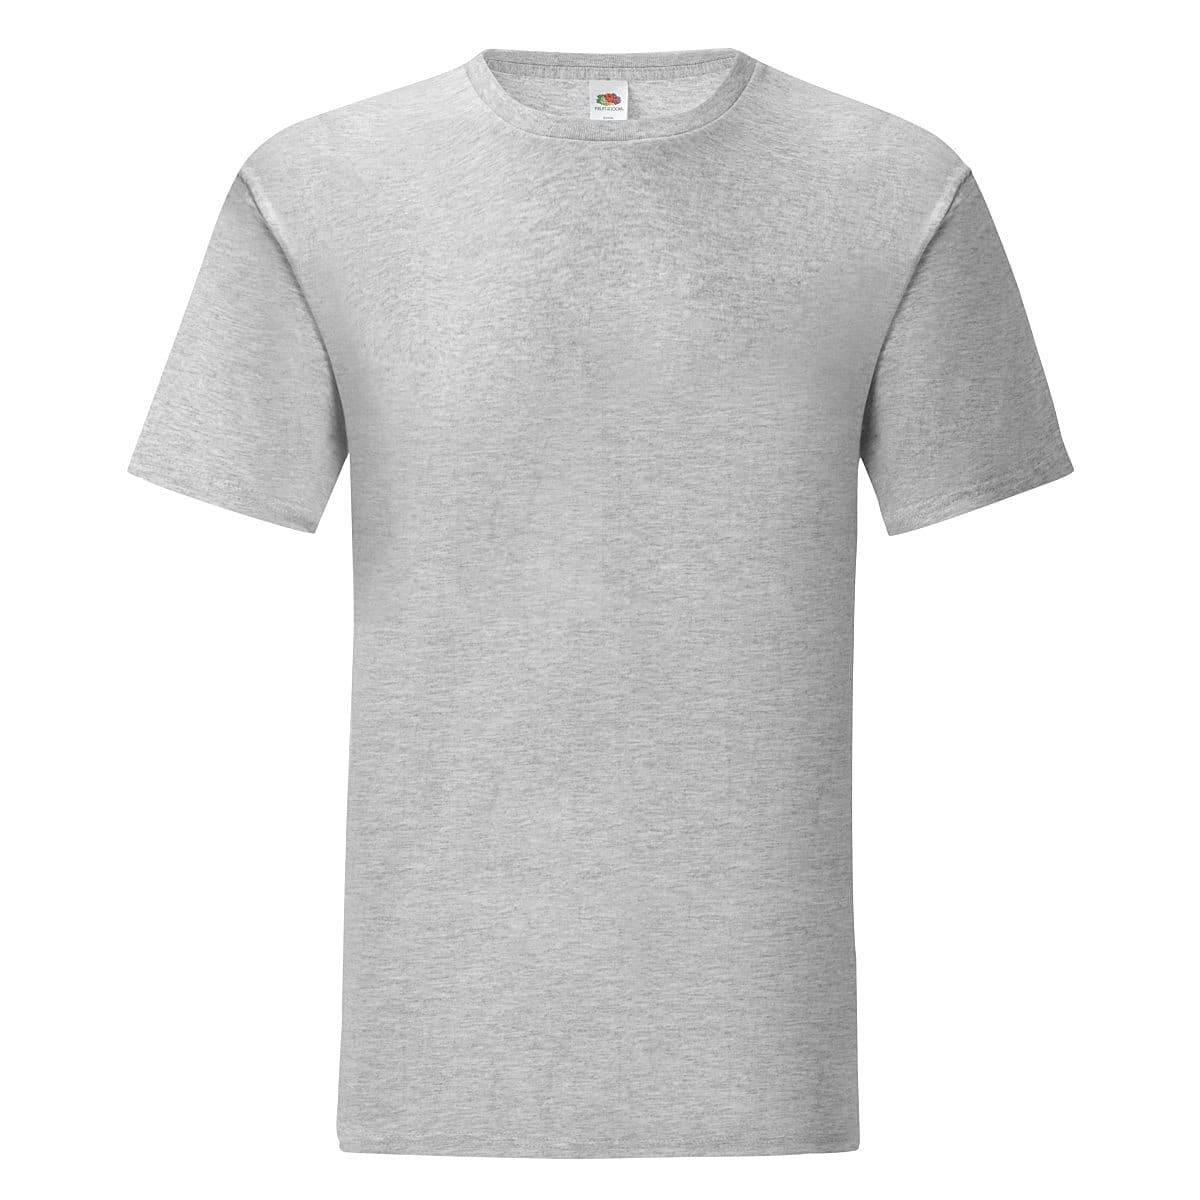 Fruit Of The Loom Mens Iconic T-Shirt in Heather Grey (Product Code: 61430)